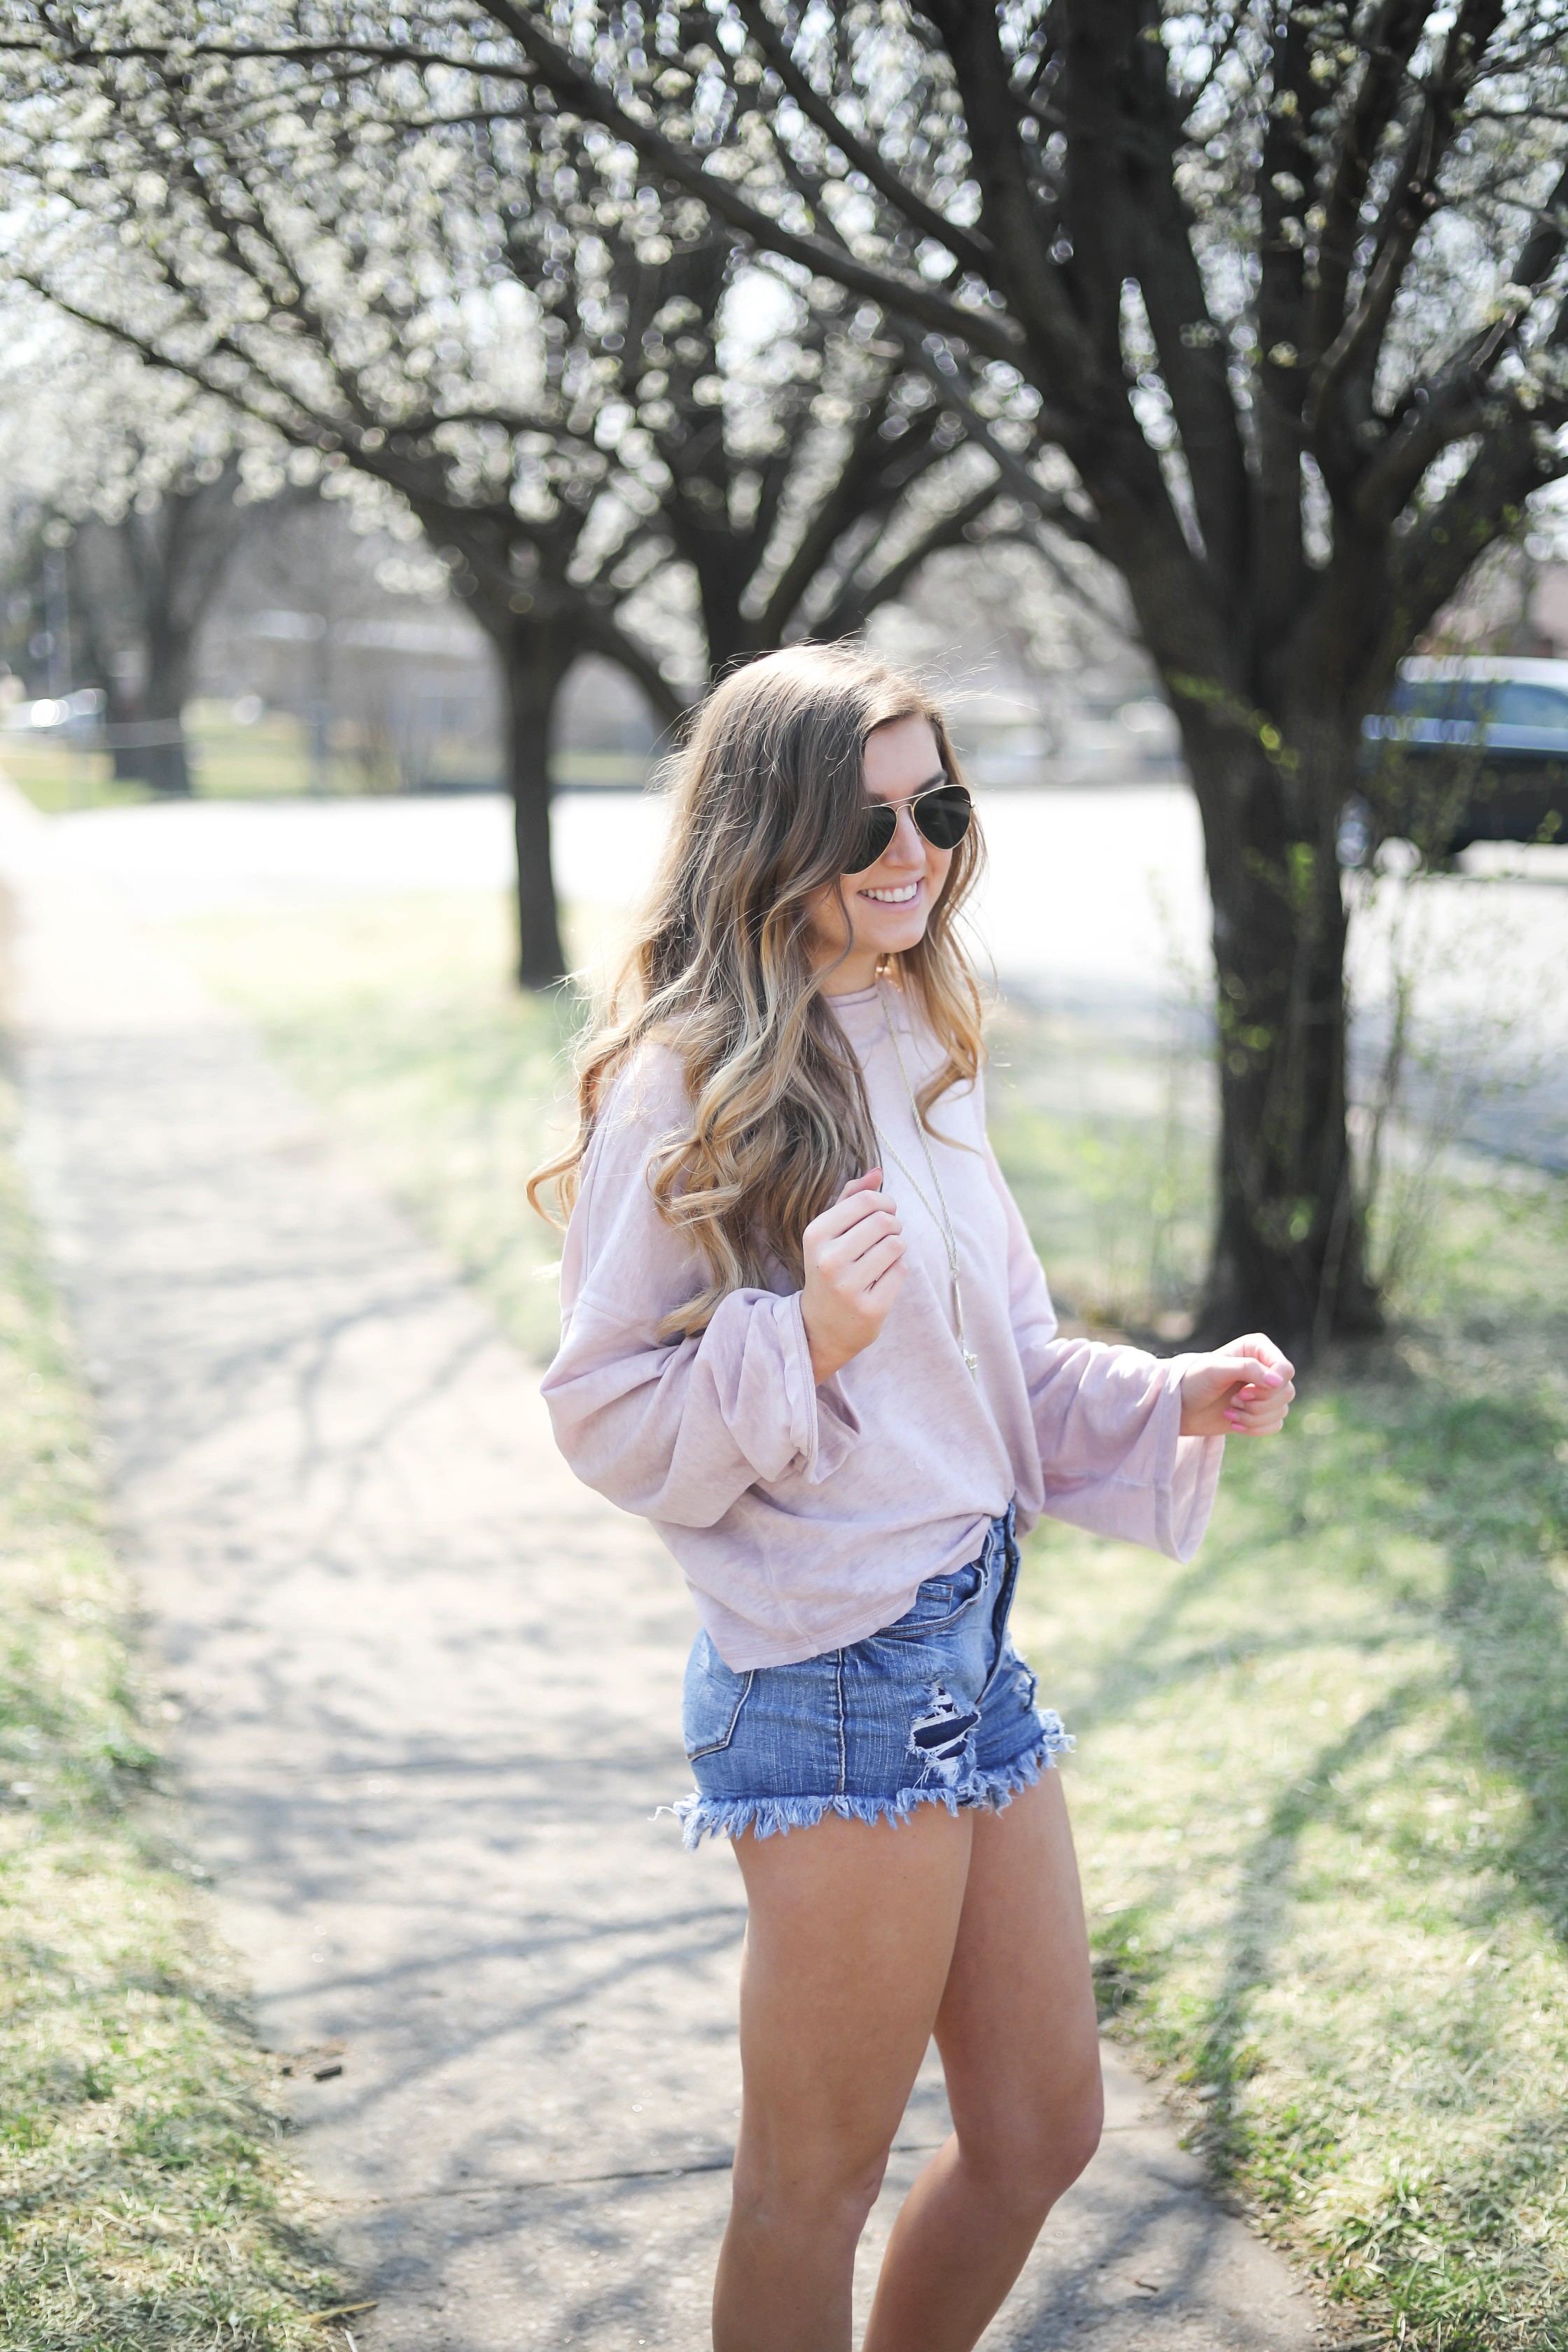 Spring outfit! You can tell it's officially spring when the trees start to bloom! I love this cozy pink top with ripped jeans. I paired them with my favorite booties and white kendra Scott necklace! By Lauren Lindmark dailydoseofcharm.com daily dose of charm